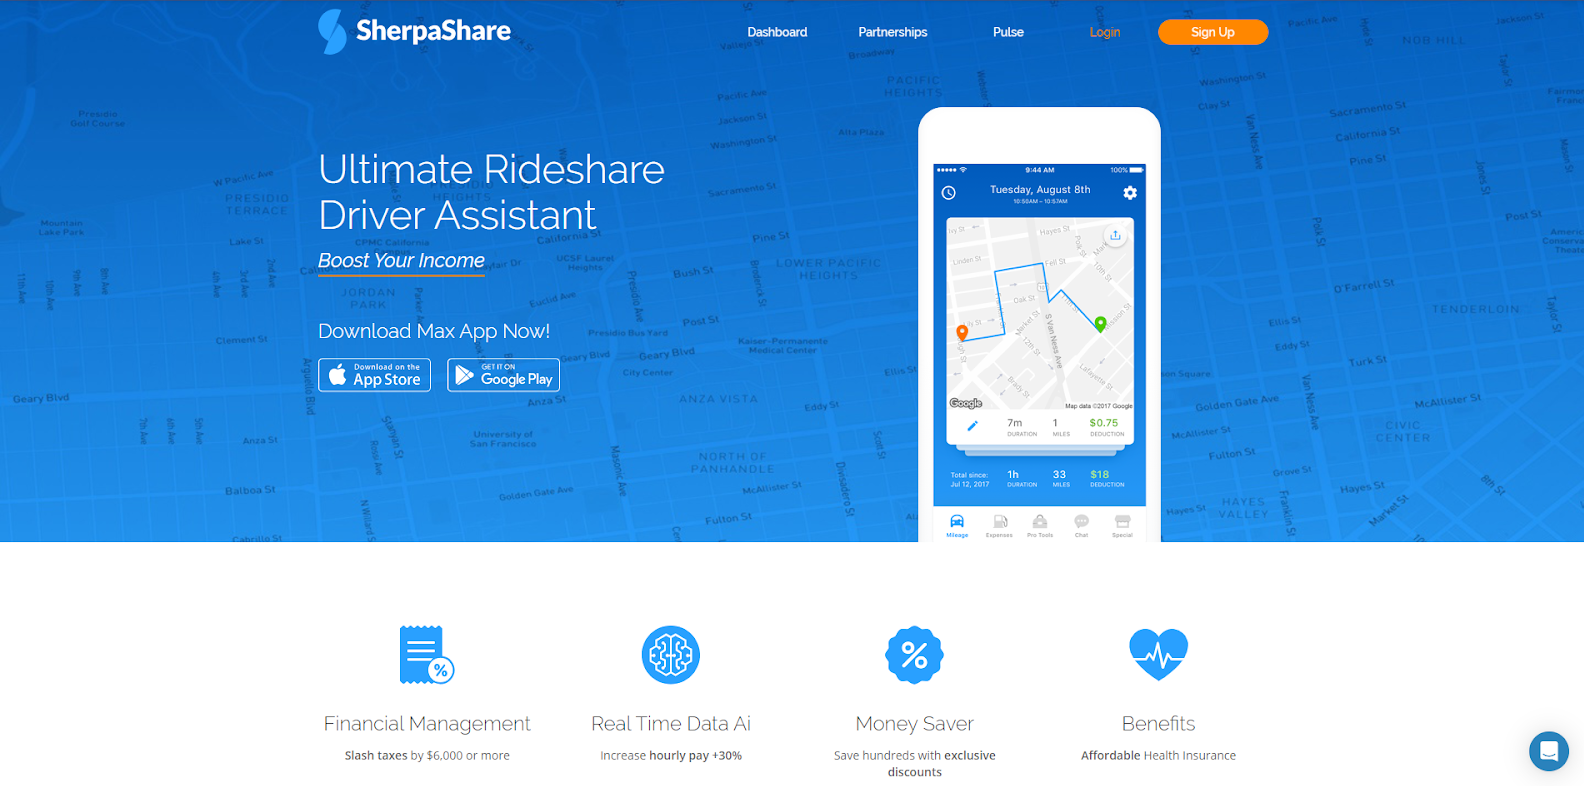 SherpaShare is a rideshare driver assistant.